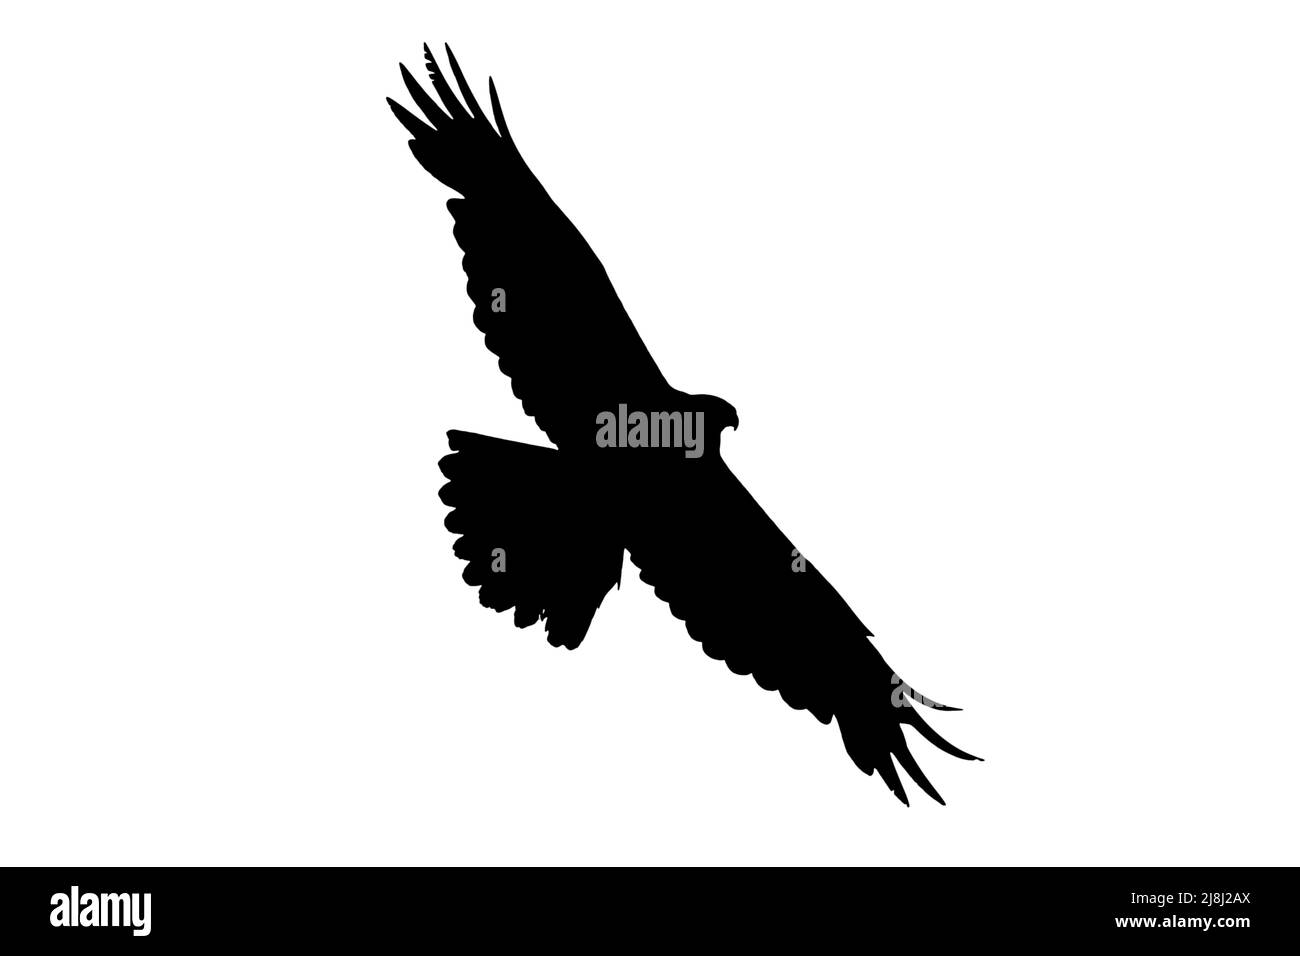 Silhouette of soaring Western marsh harrier (Circus aeruginosus) in flight outlined against white background to show wings, head and tail shapes Stock Photo